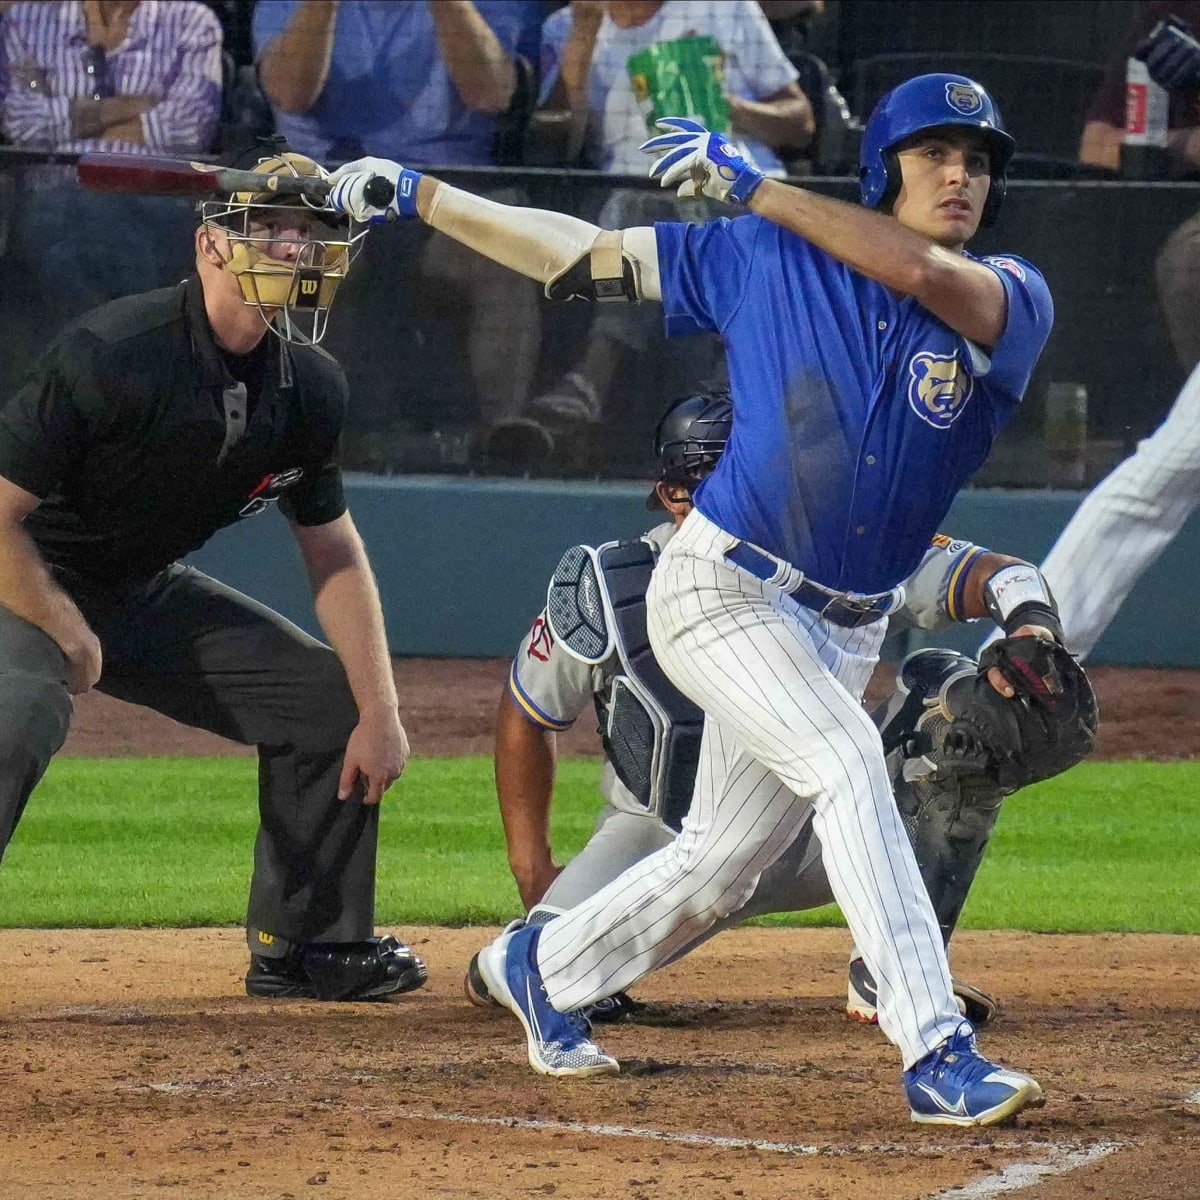 New Cubs Prospect Alfonso Rivas Offers a Very Interesting Profile